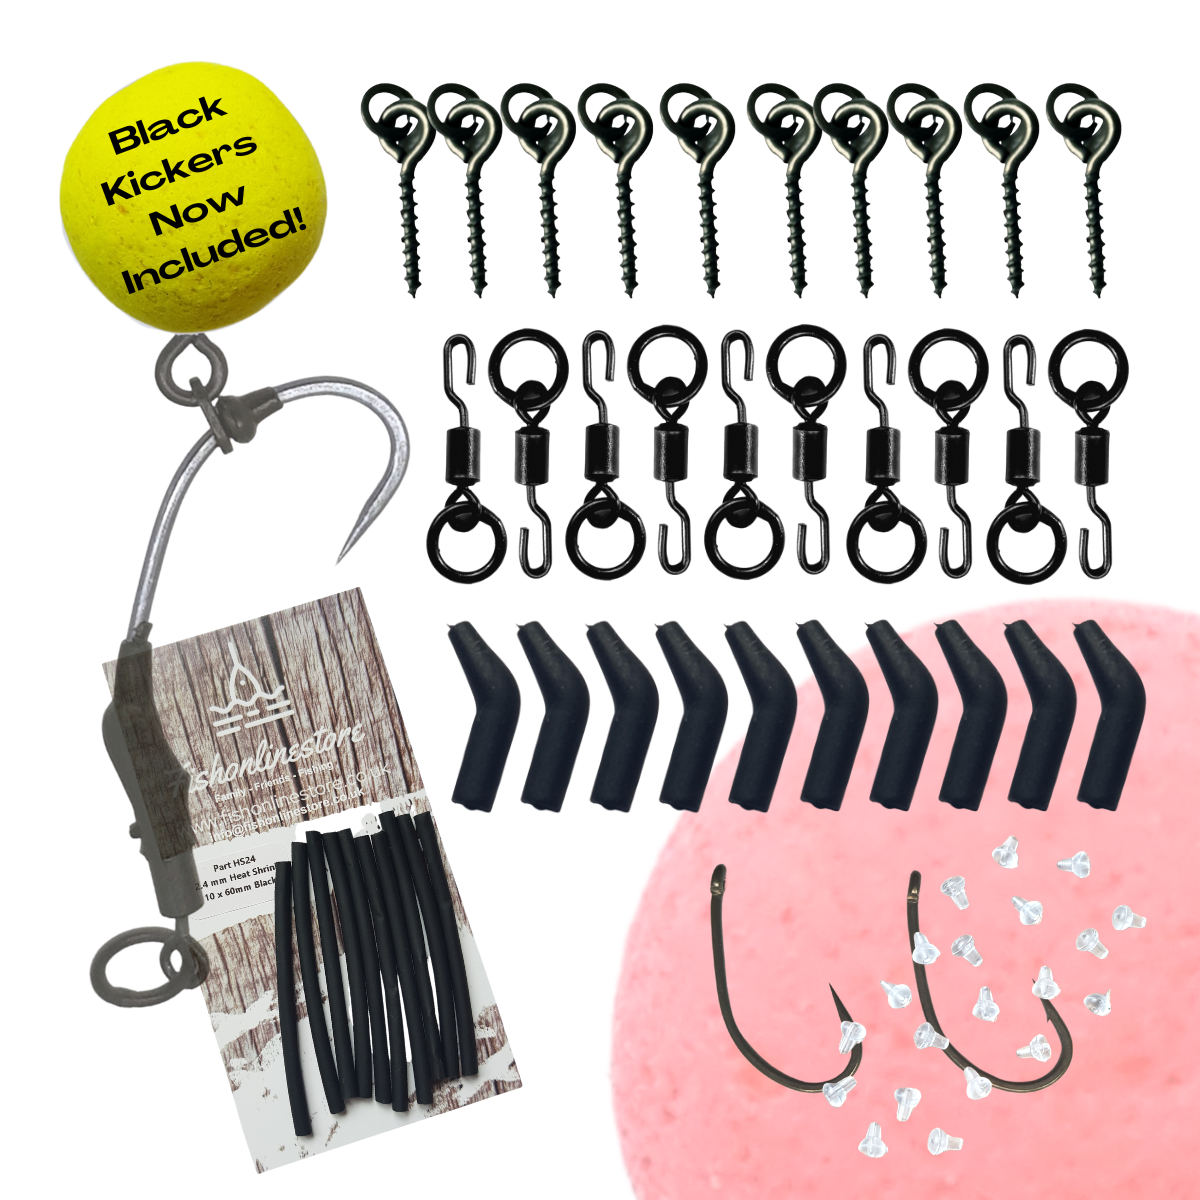 New 60 Piece Carp Fishing Ronnie Rig Spinner Rig Component Set Carp Bundle Terminal Tackle. NEW IN STOCK.